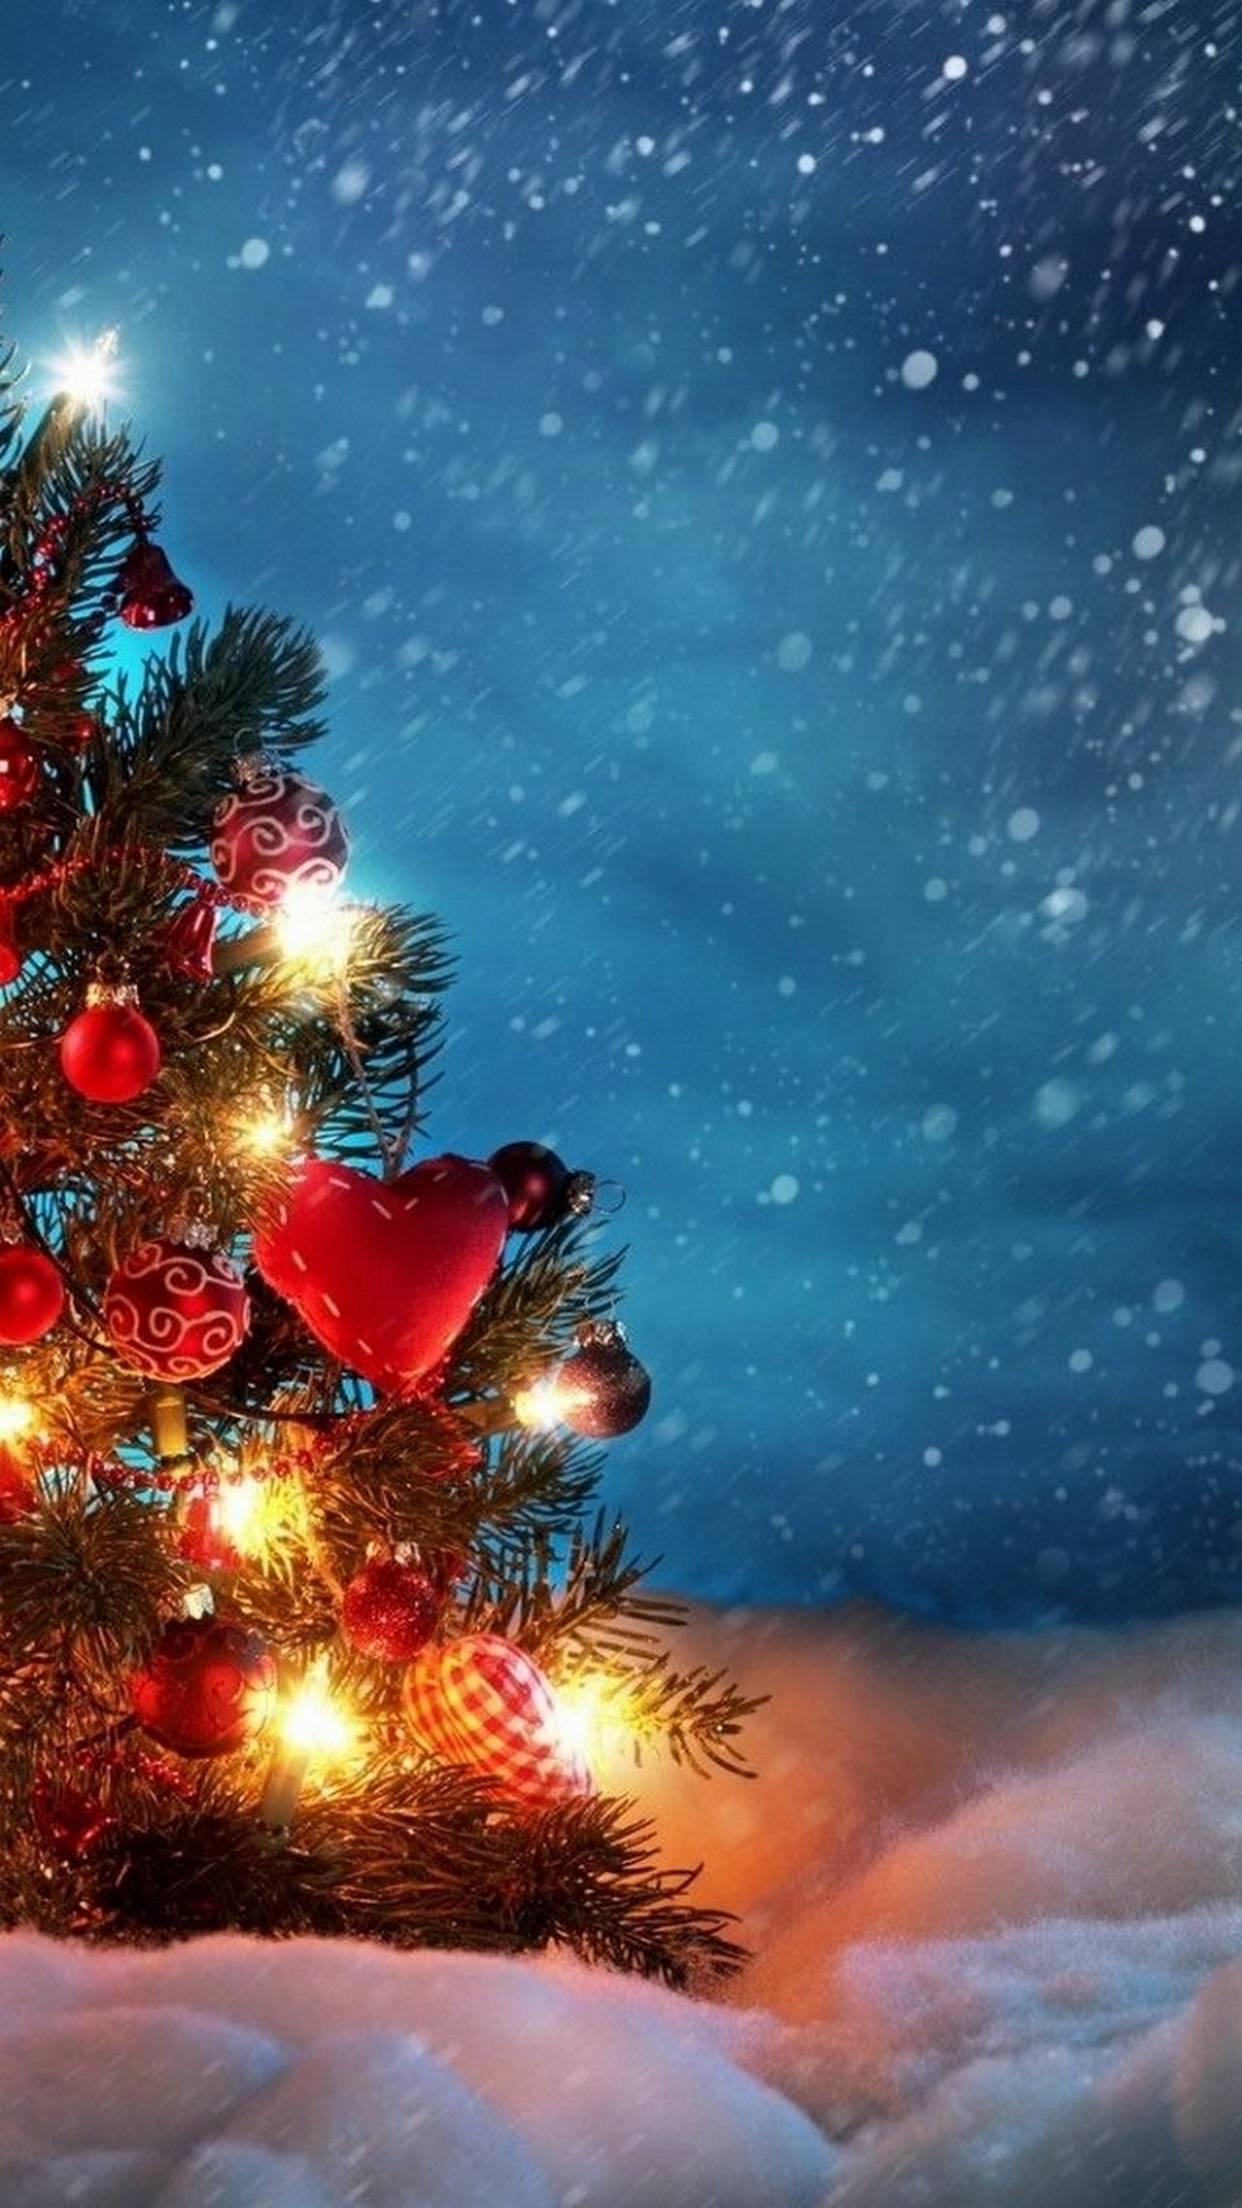 Free download Try to Use 32 Christmas Wallpapers for iPhones